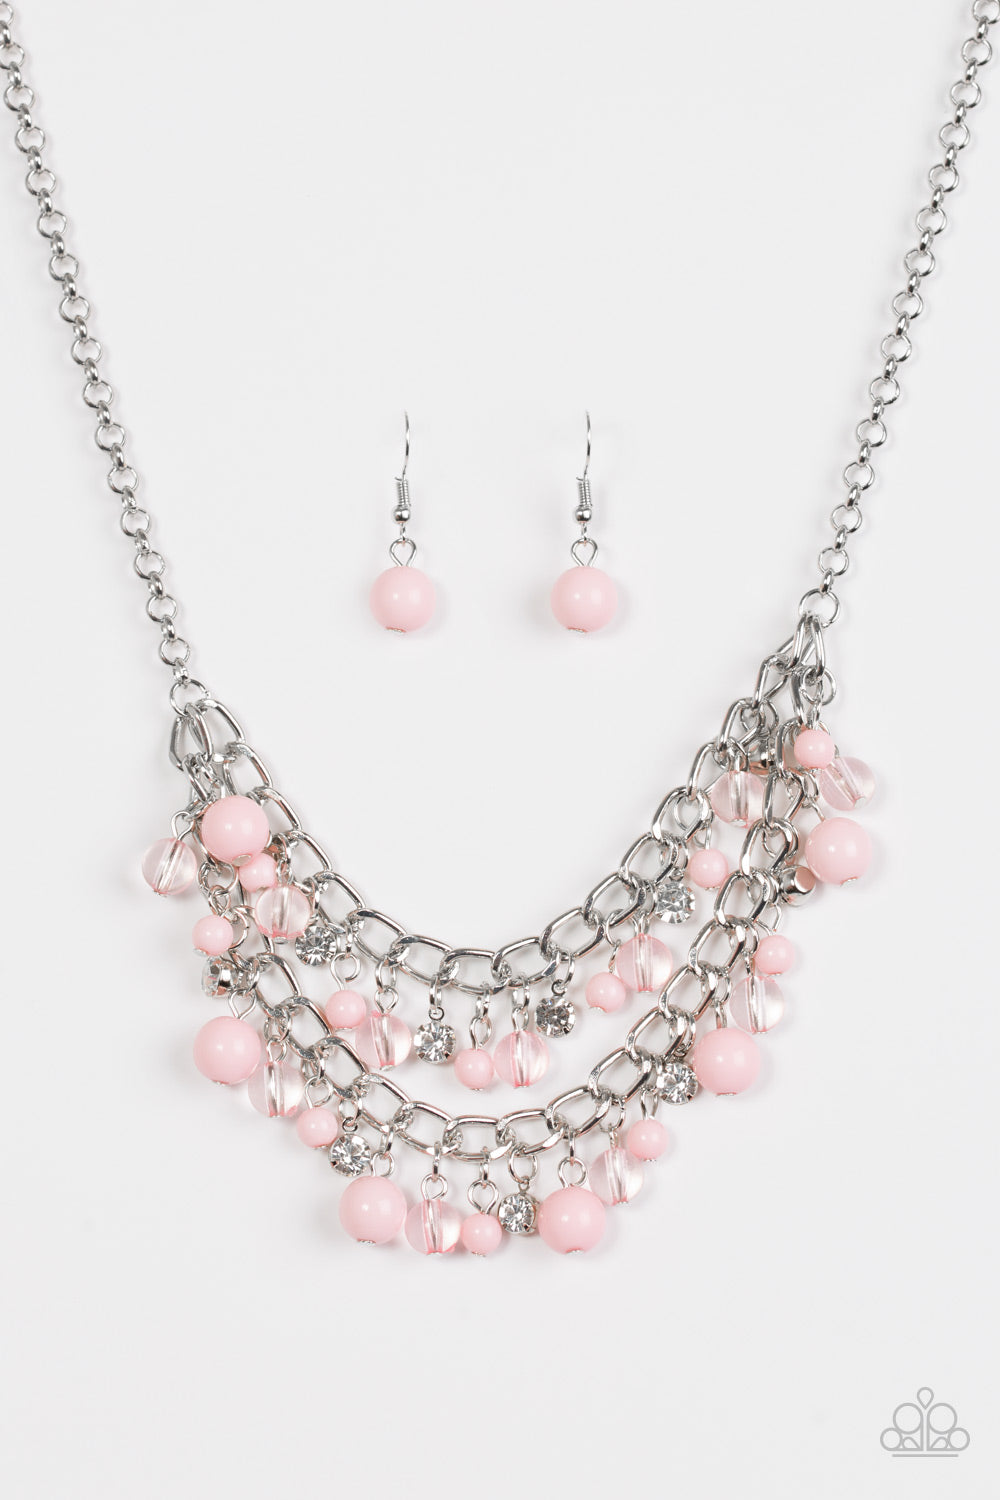 Paparazzi Accessories Bridal Party - Pink Necklace & Earrings 